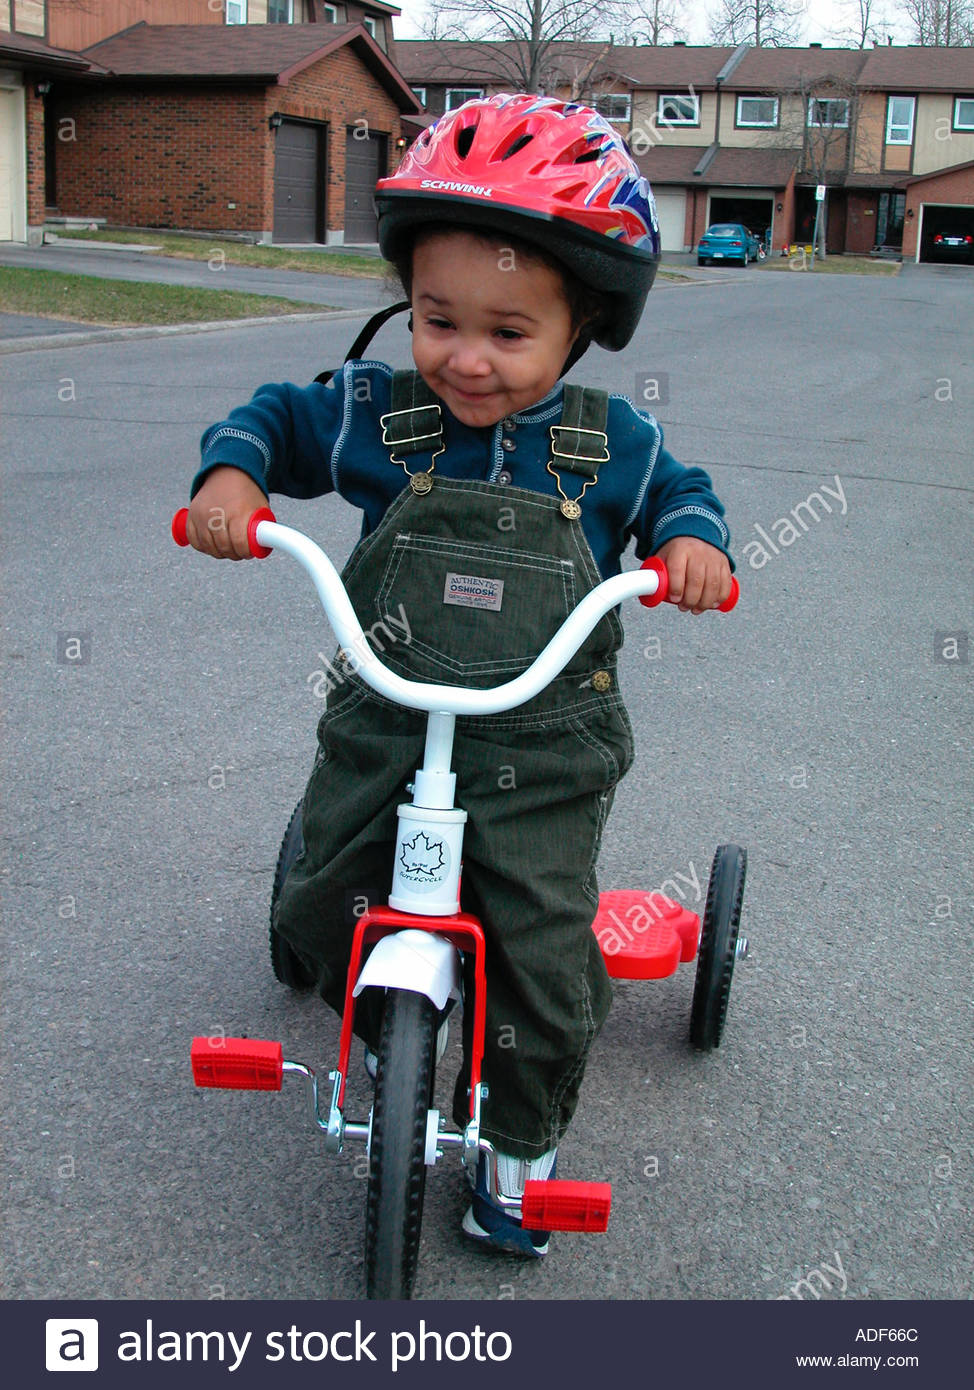 child riding tricycle